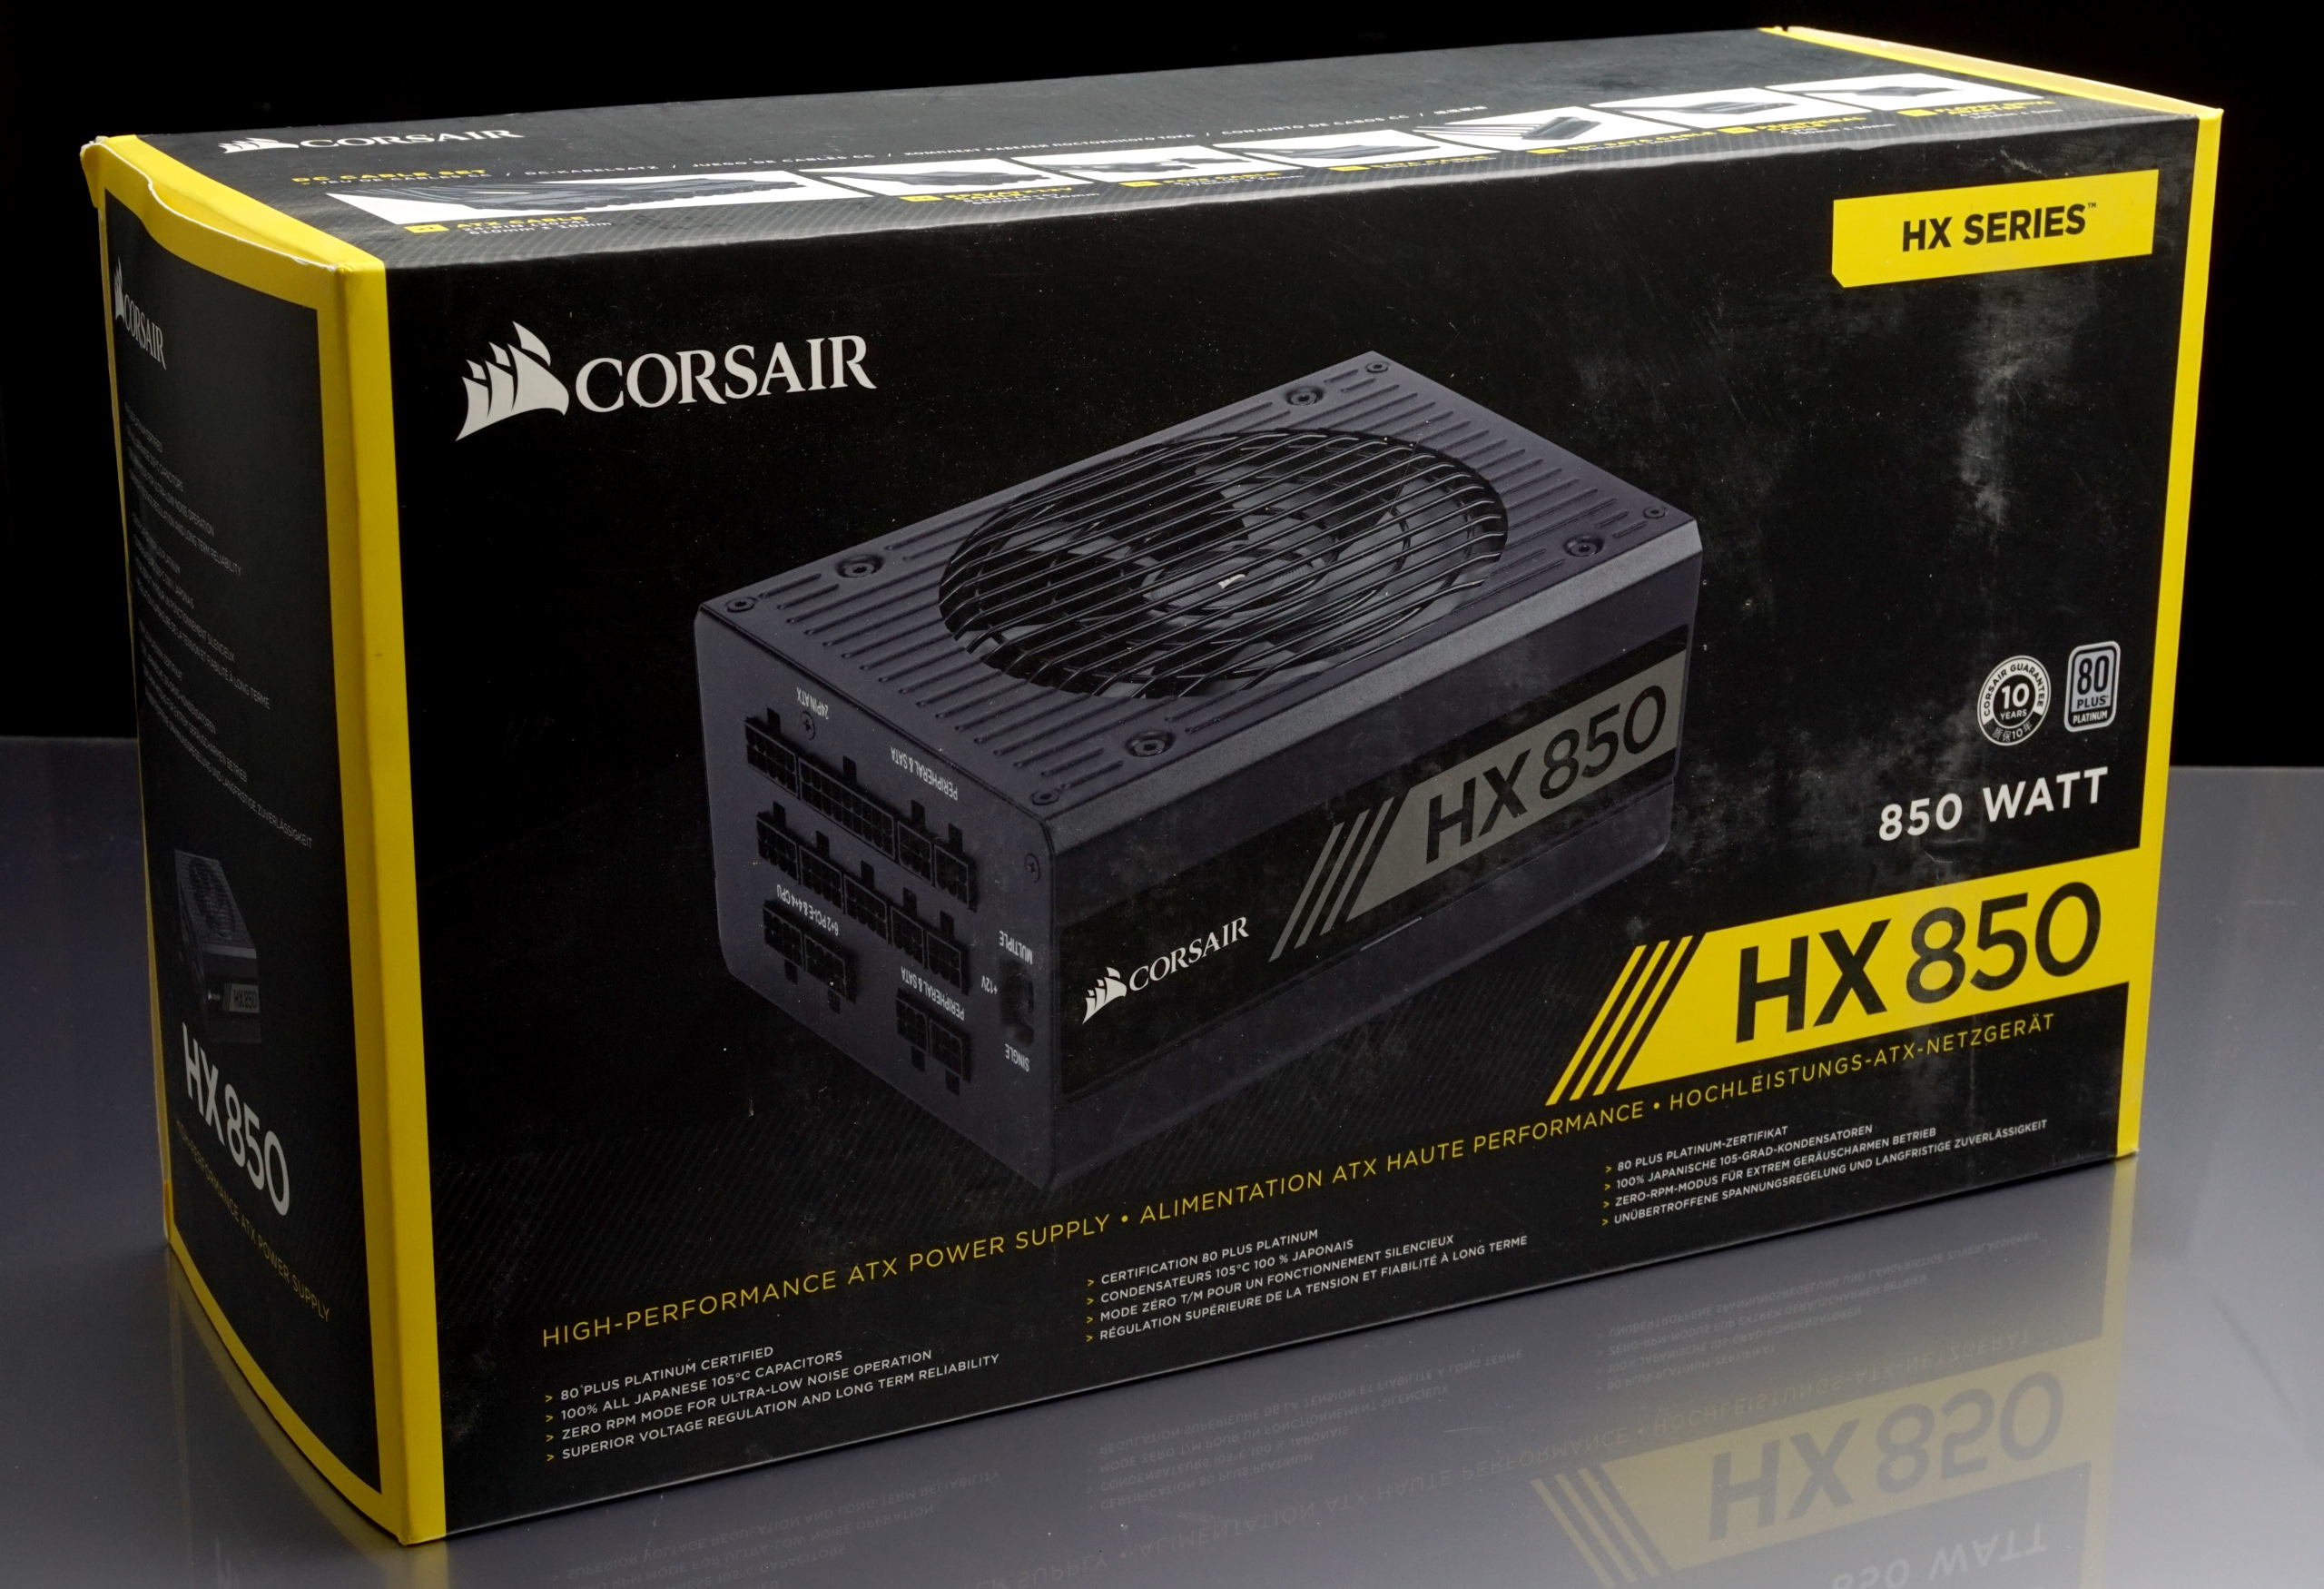 Inspection, Package and Contents The HX850 80Plus Platinum PSU Review